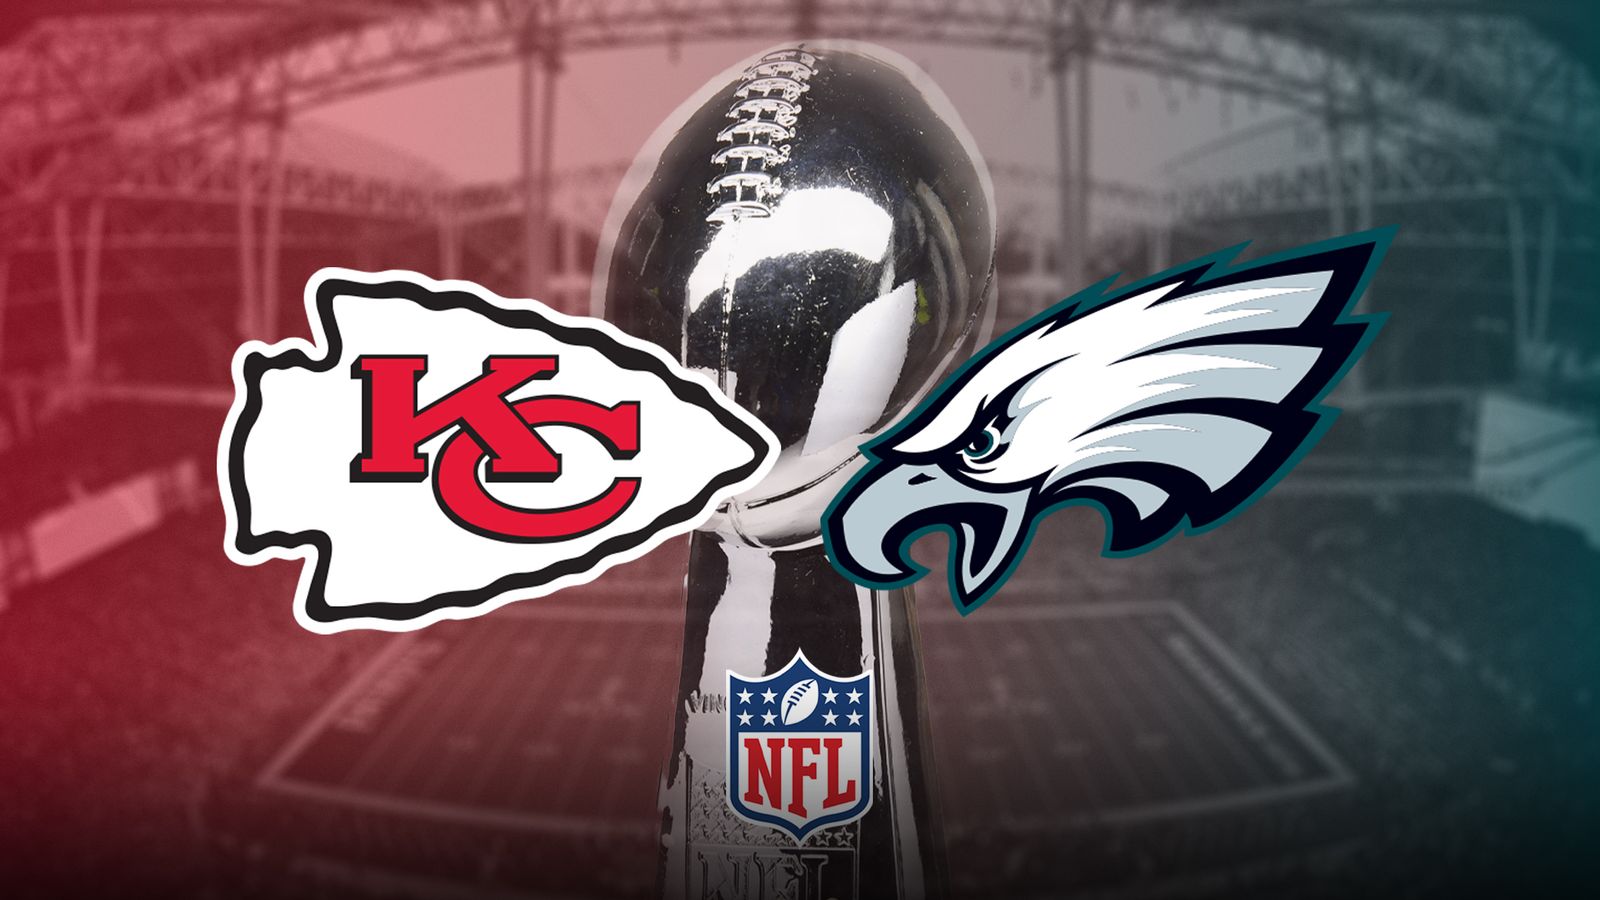 Super Bowl LVII on Sky Sports NFL: Chiefs vs Eagles - everything you need to know about the NFL's season-ending spectacular